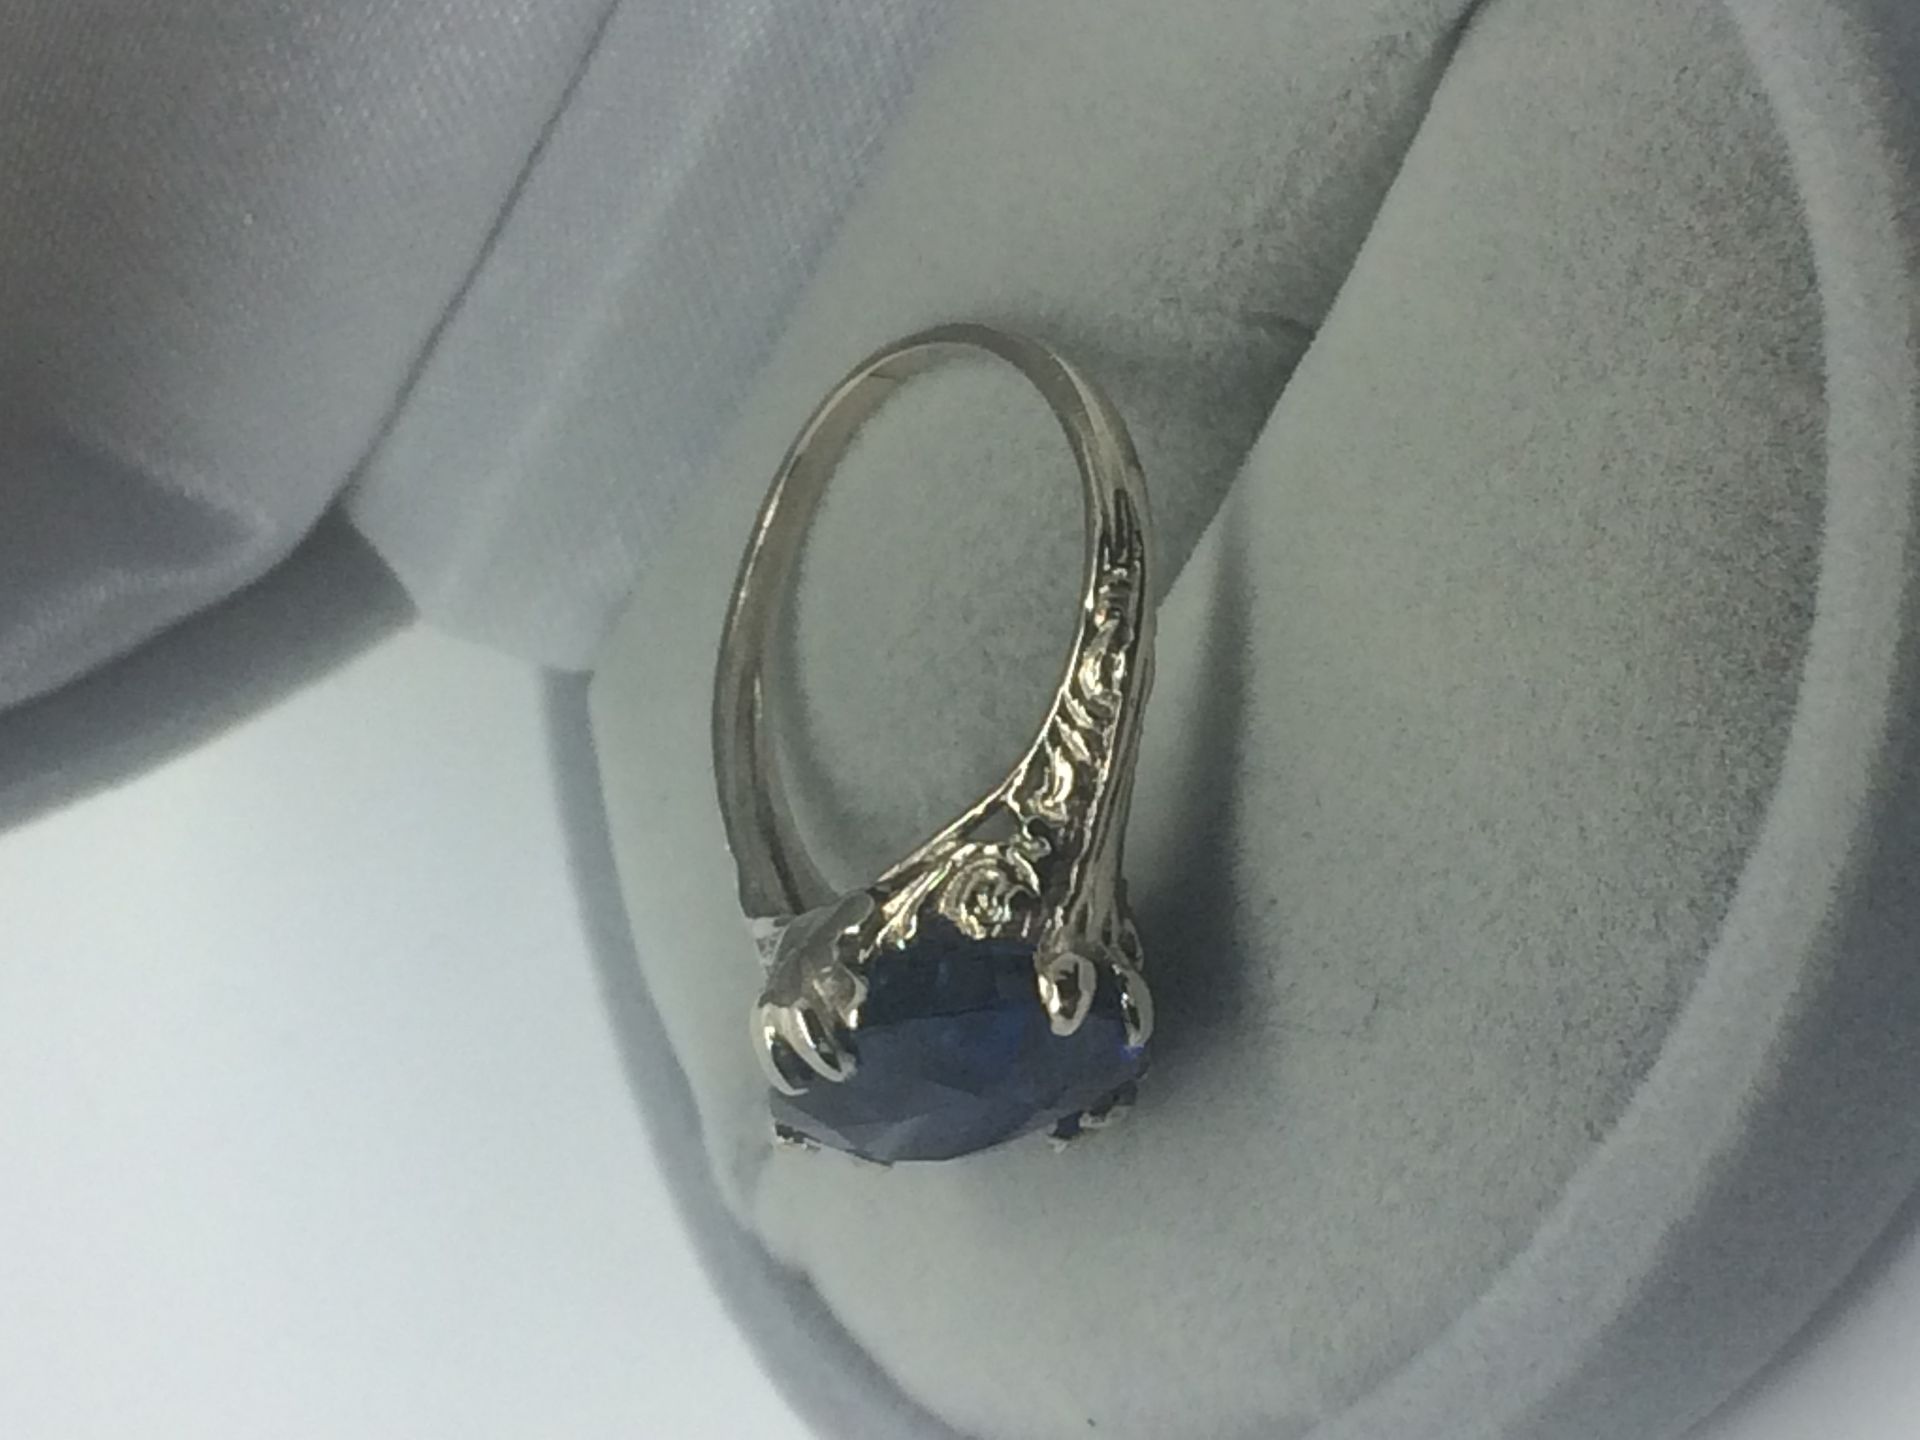 6.10 CT SAPPHIRE RING SET IN 14 CT WHITE GOLD RING - Image 5 of 6